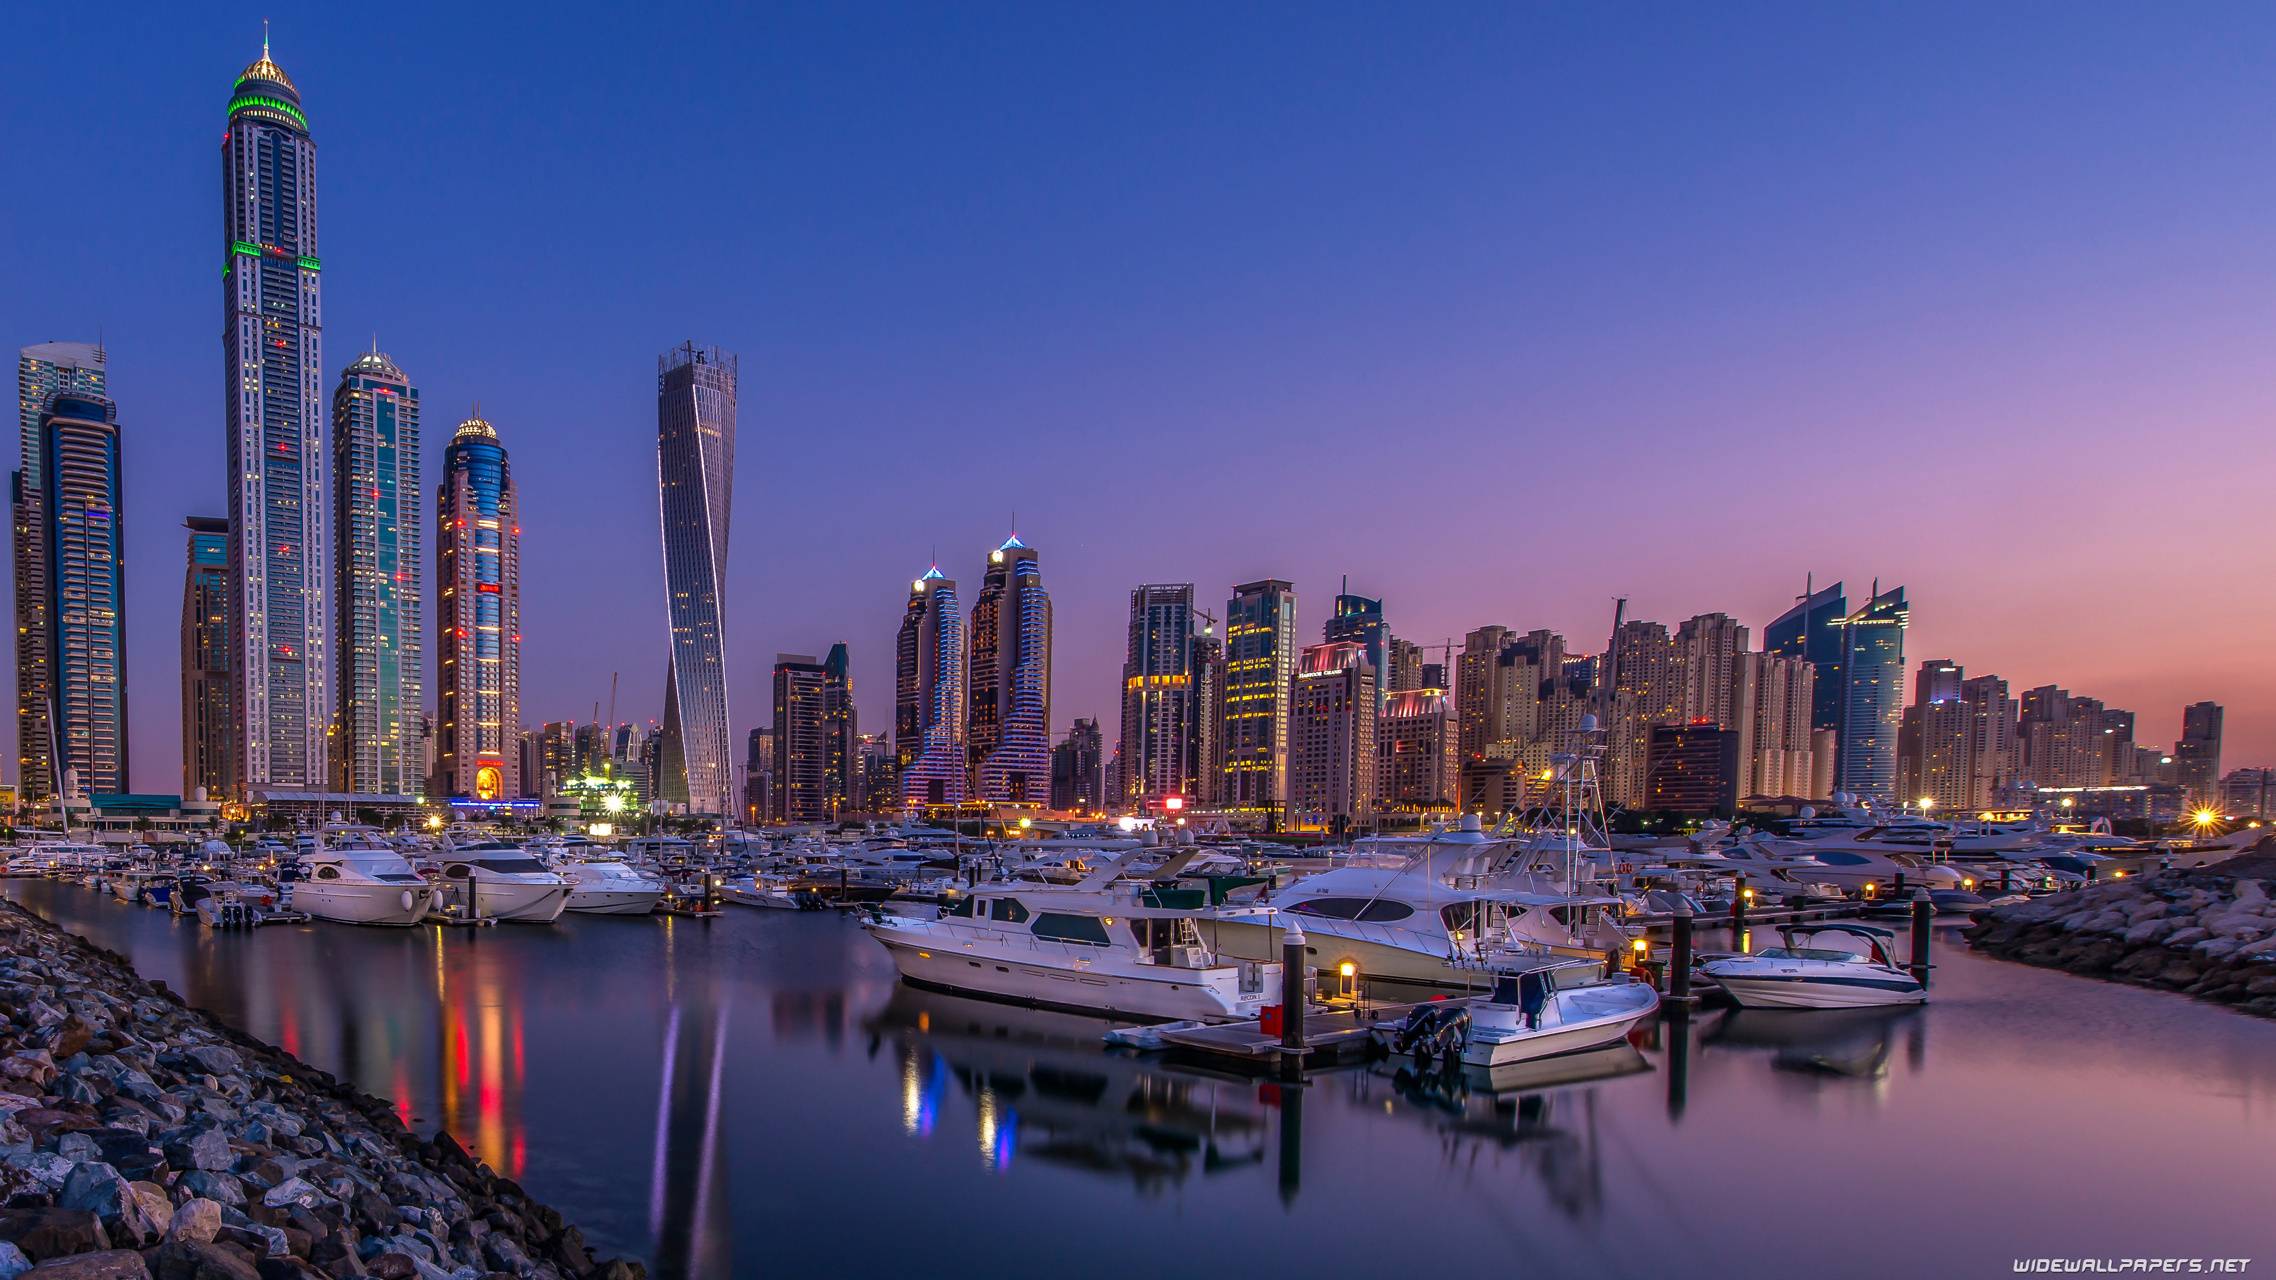 The skyline of Dubai at night with boats in the foreground. - Dubai